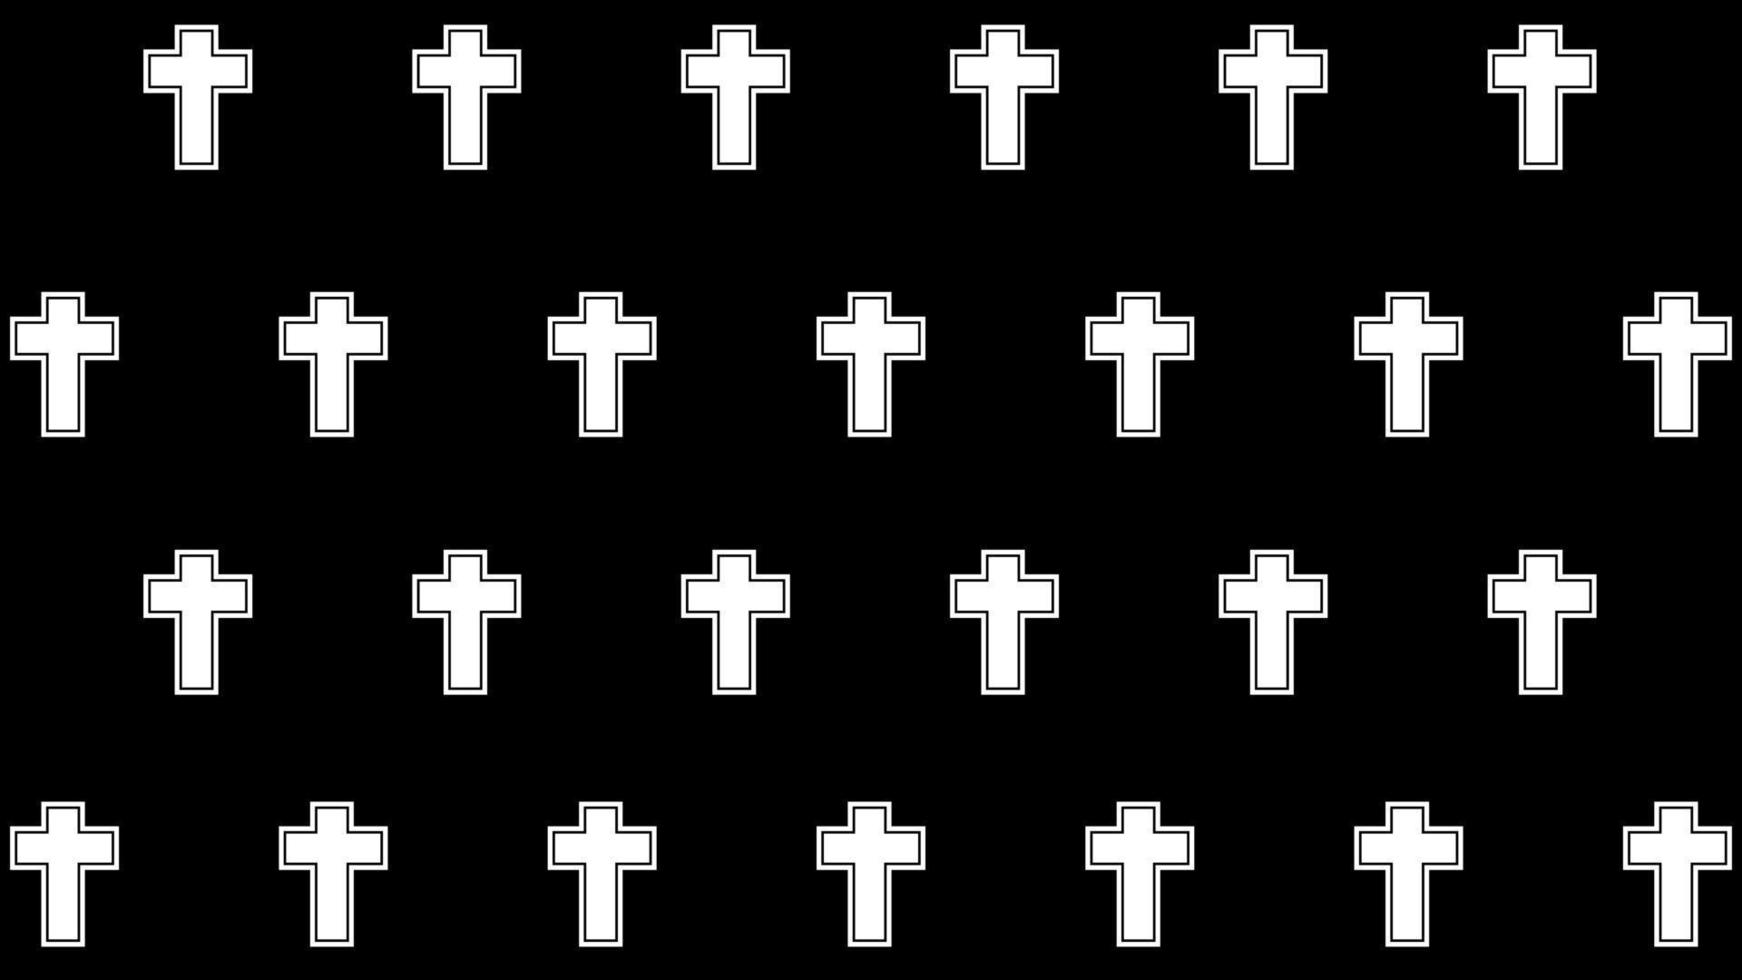 Happy Halloween cross on black background, perfect for wallpaper, backdrop, postcard, background for your design vector